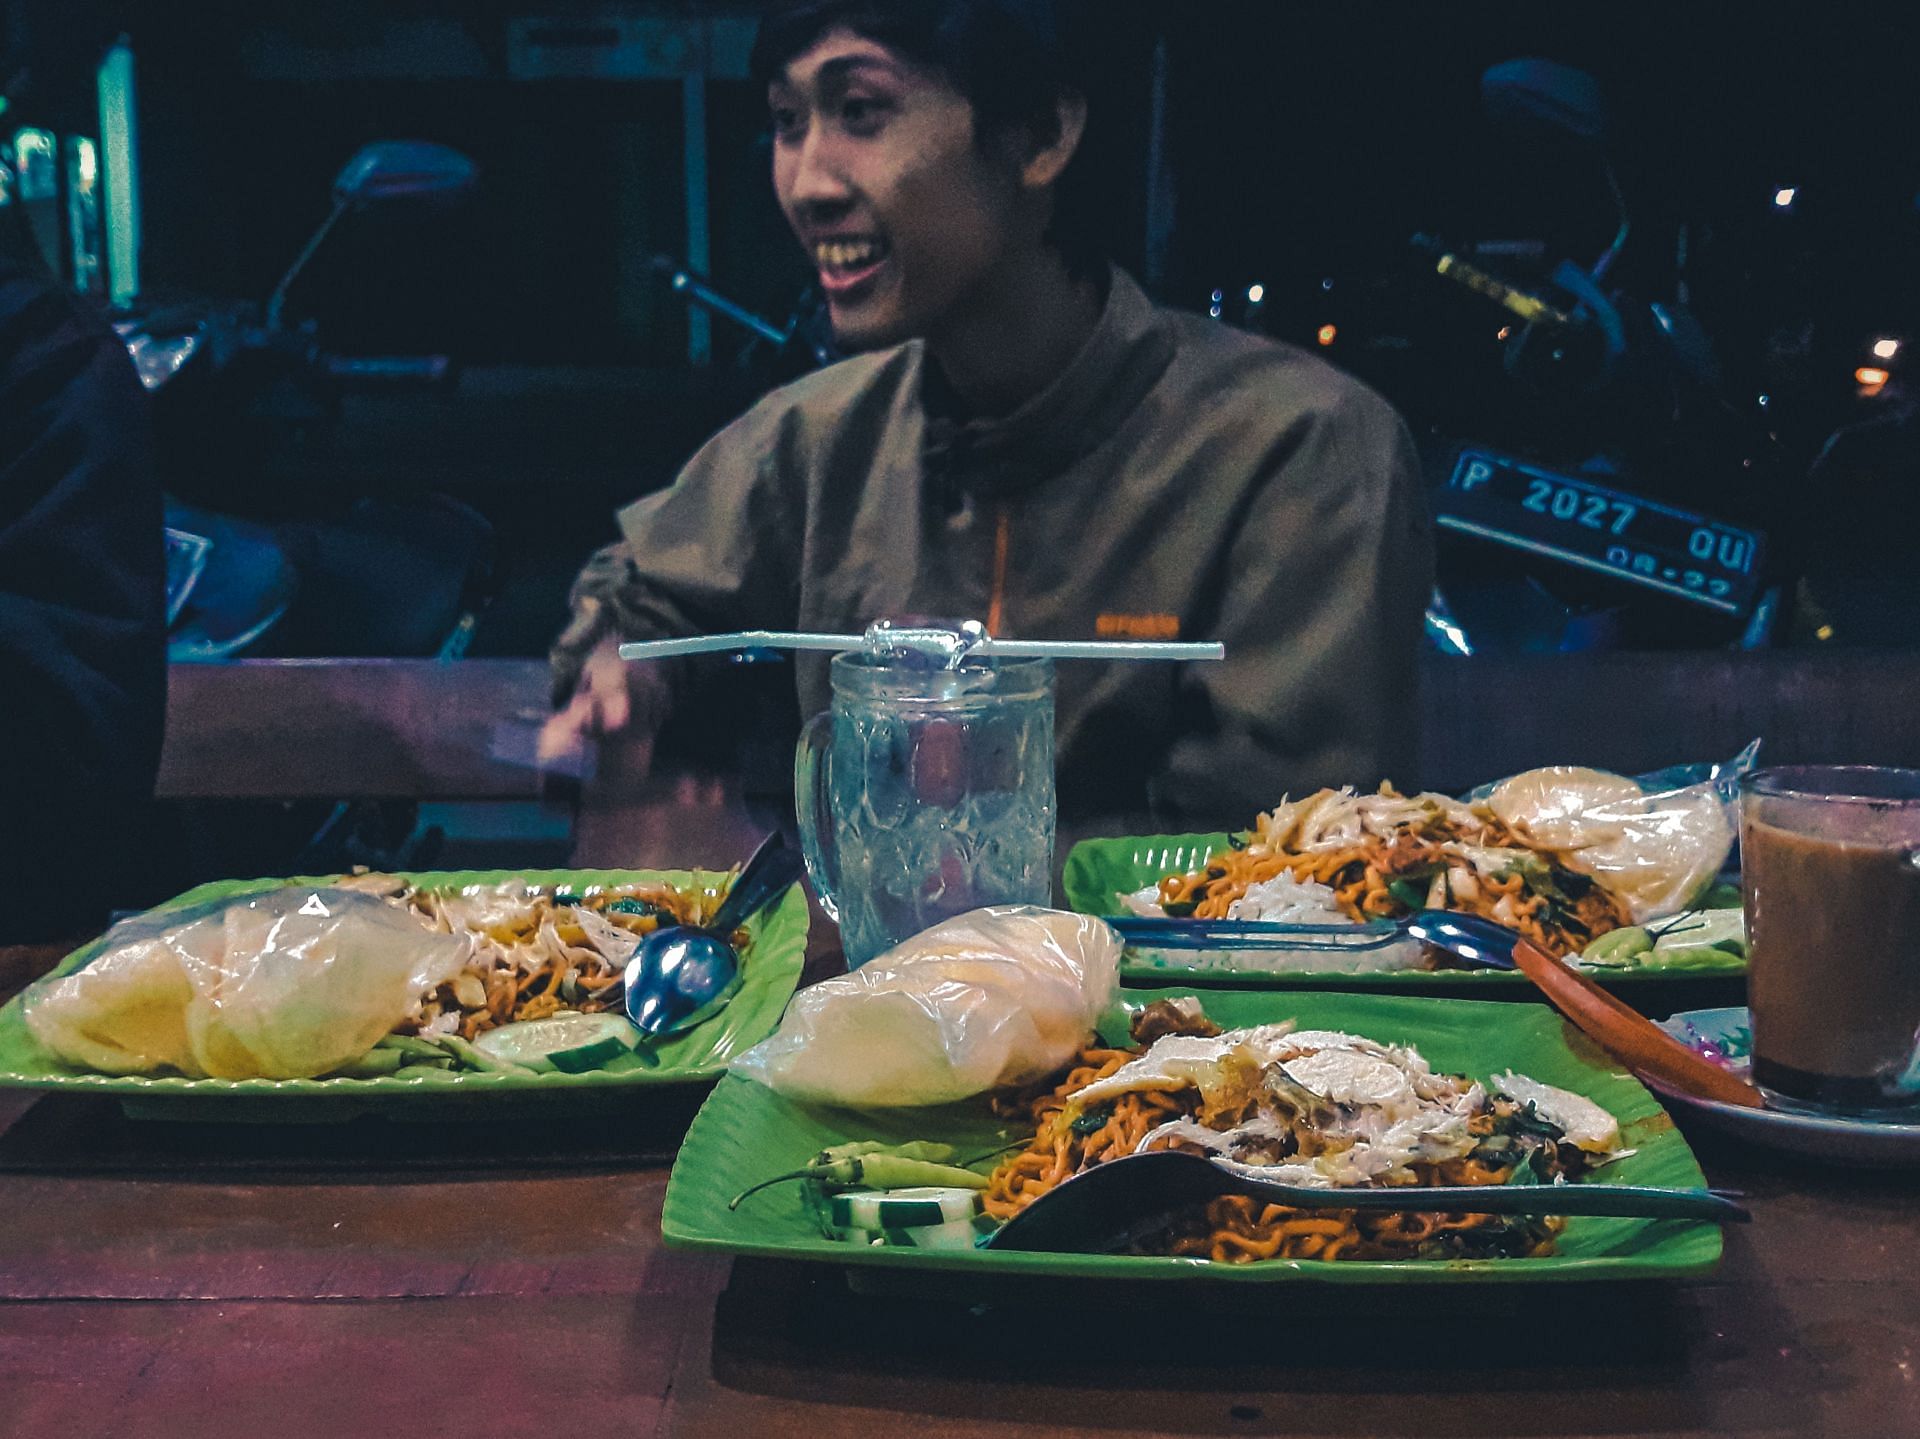 Generally eating late at night involves munching on unhealthy foods. (Image via Unsplash/ Imam Fadly)